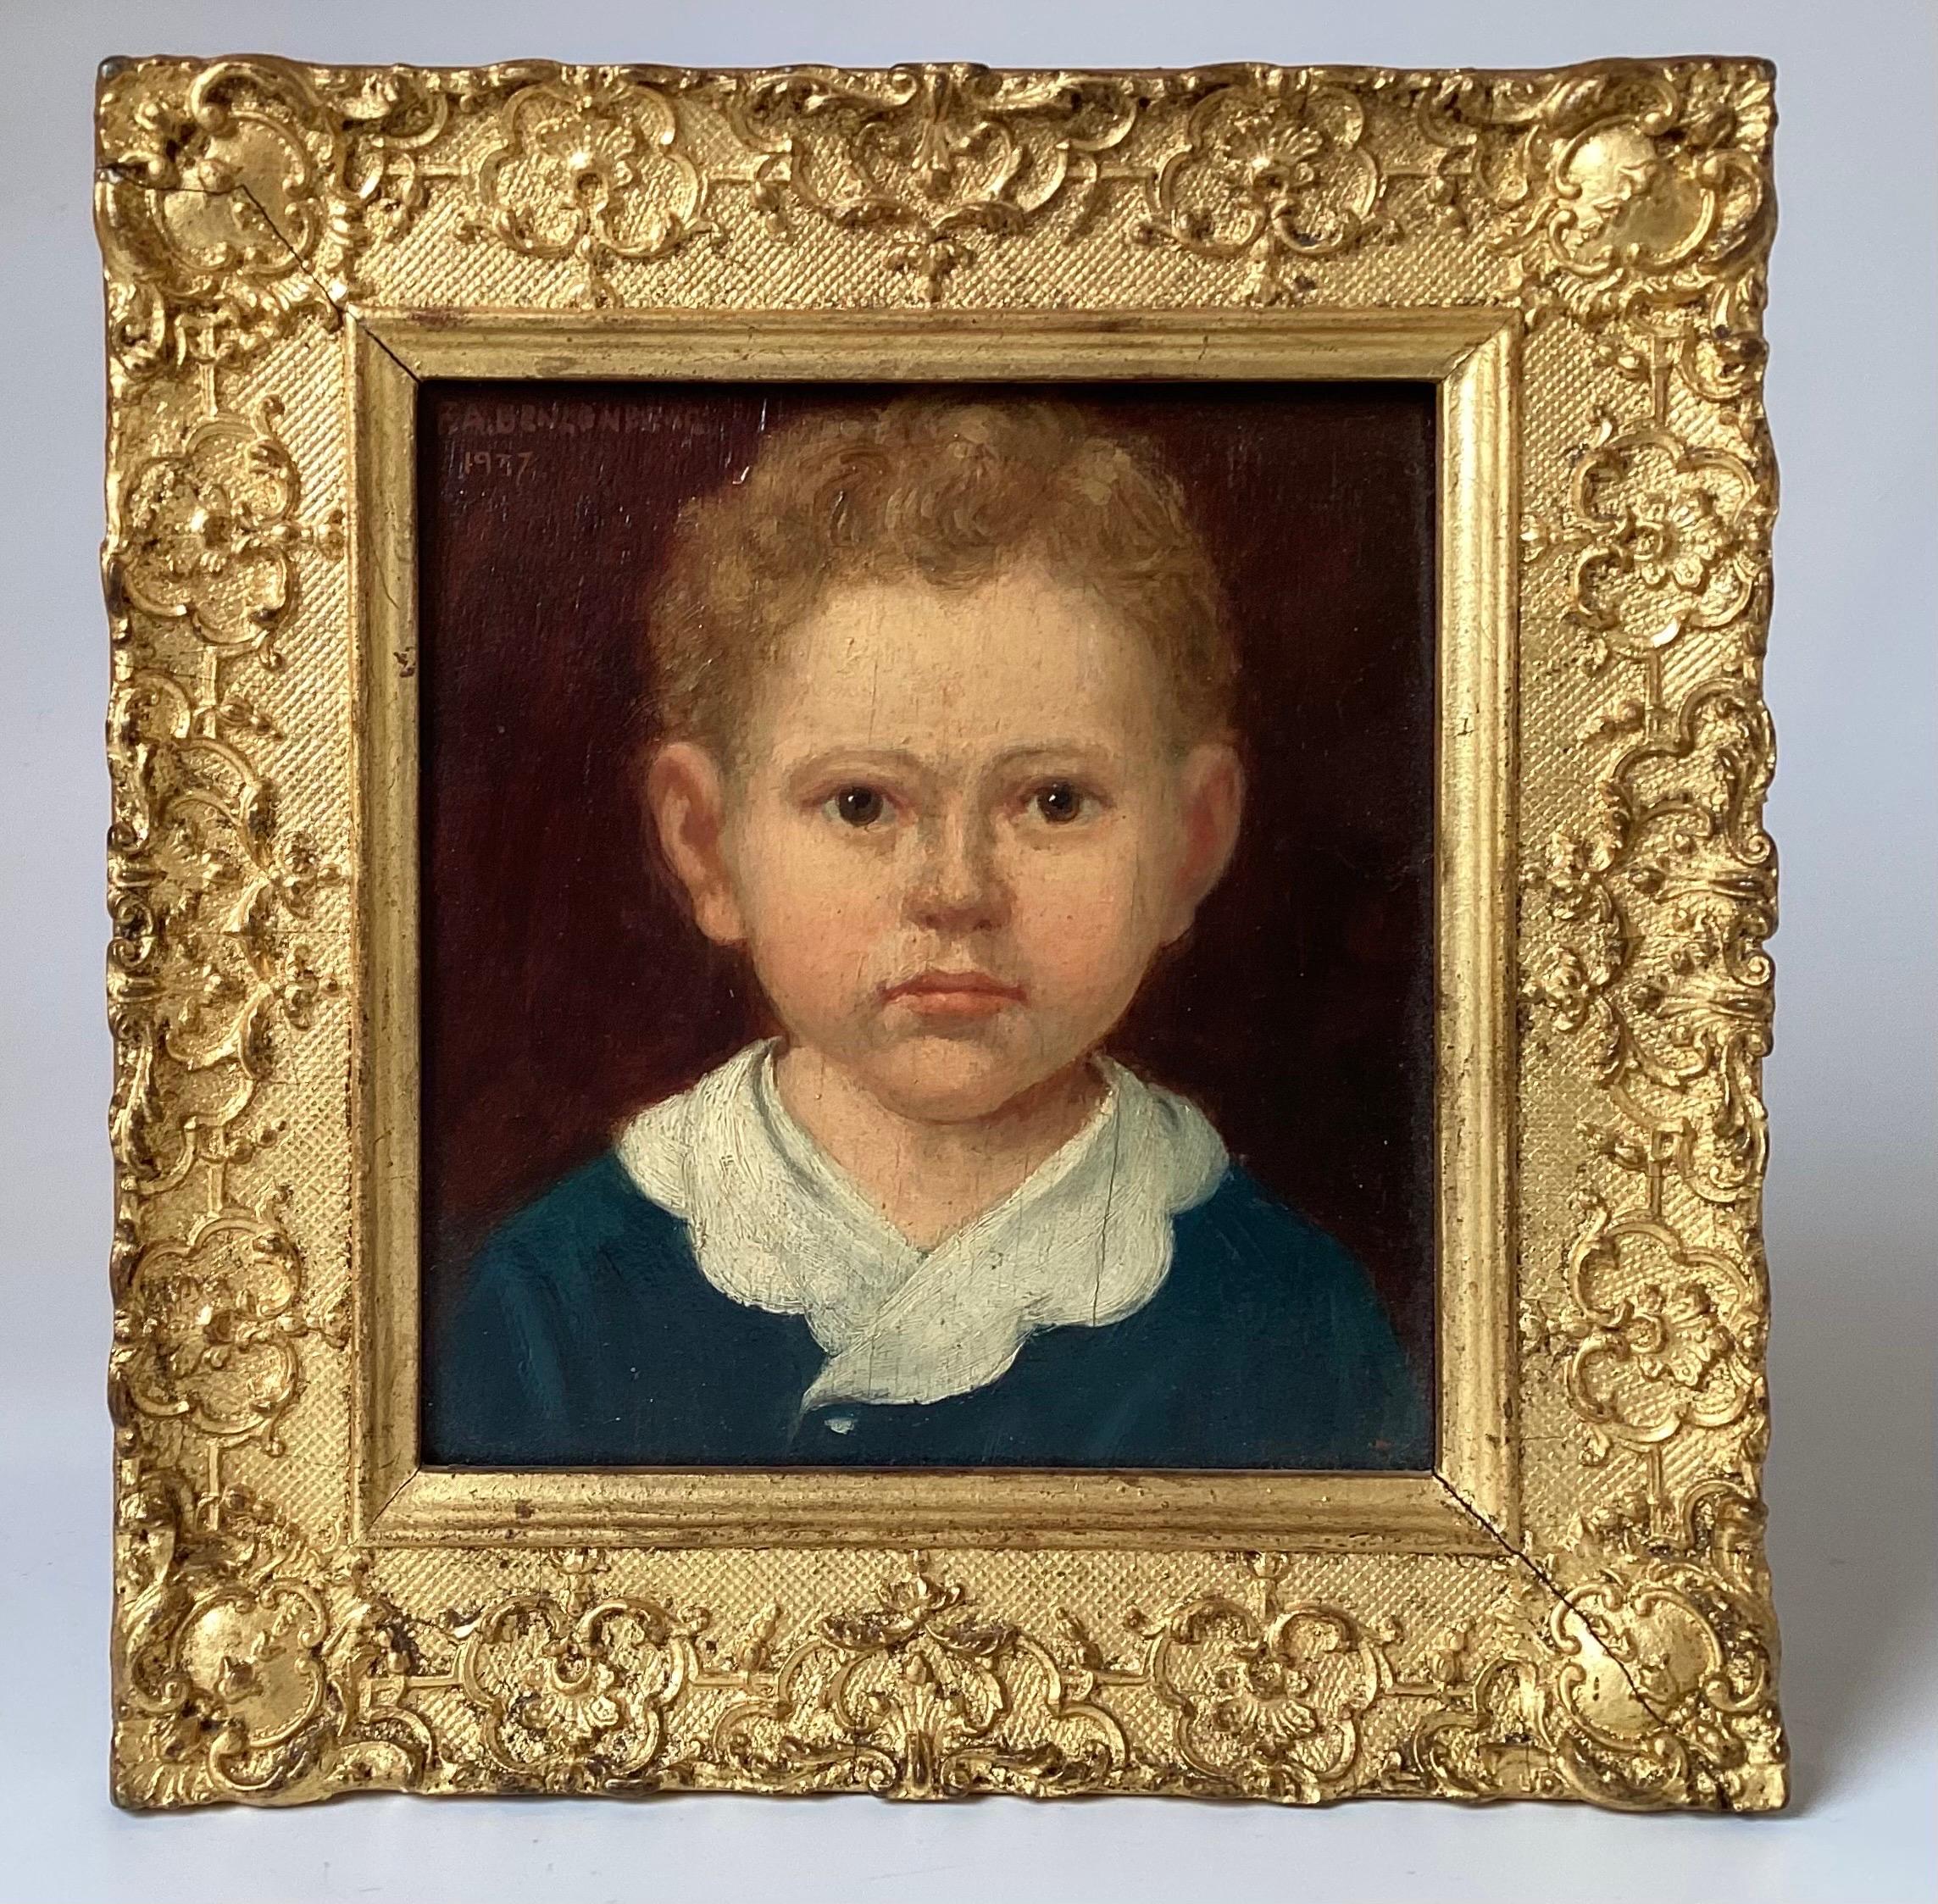 Beautiful original small portrait of a young boy, artist signed and dated 1937. The old world style painting on wood board with information listed on the back. The framed painting measures 8.5 by 8.5 with the painting measuring 5.5 by 5.5.